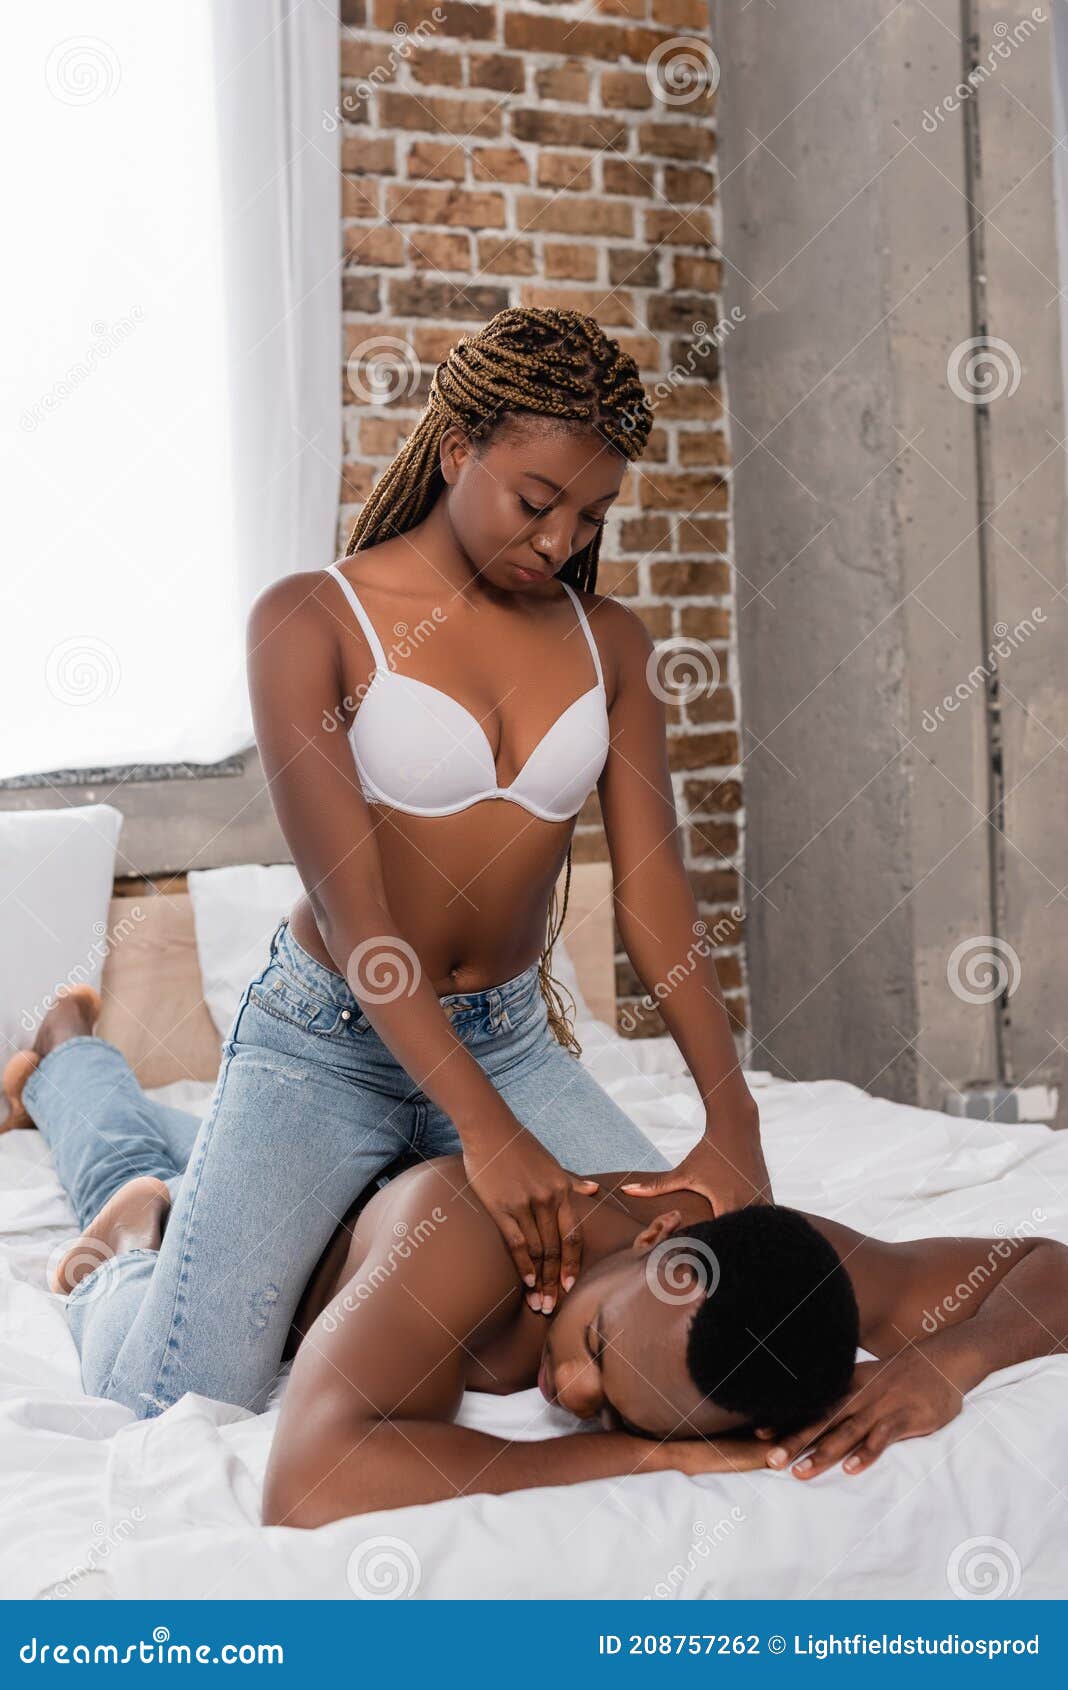 https://thumbs.dreamstime.com/z/view-romantic-shirtless-african-american-sexy-african-american-women-bra-touching-back-shirtless-boyfriend-lying-bed-208757262.jpg